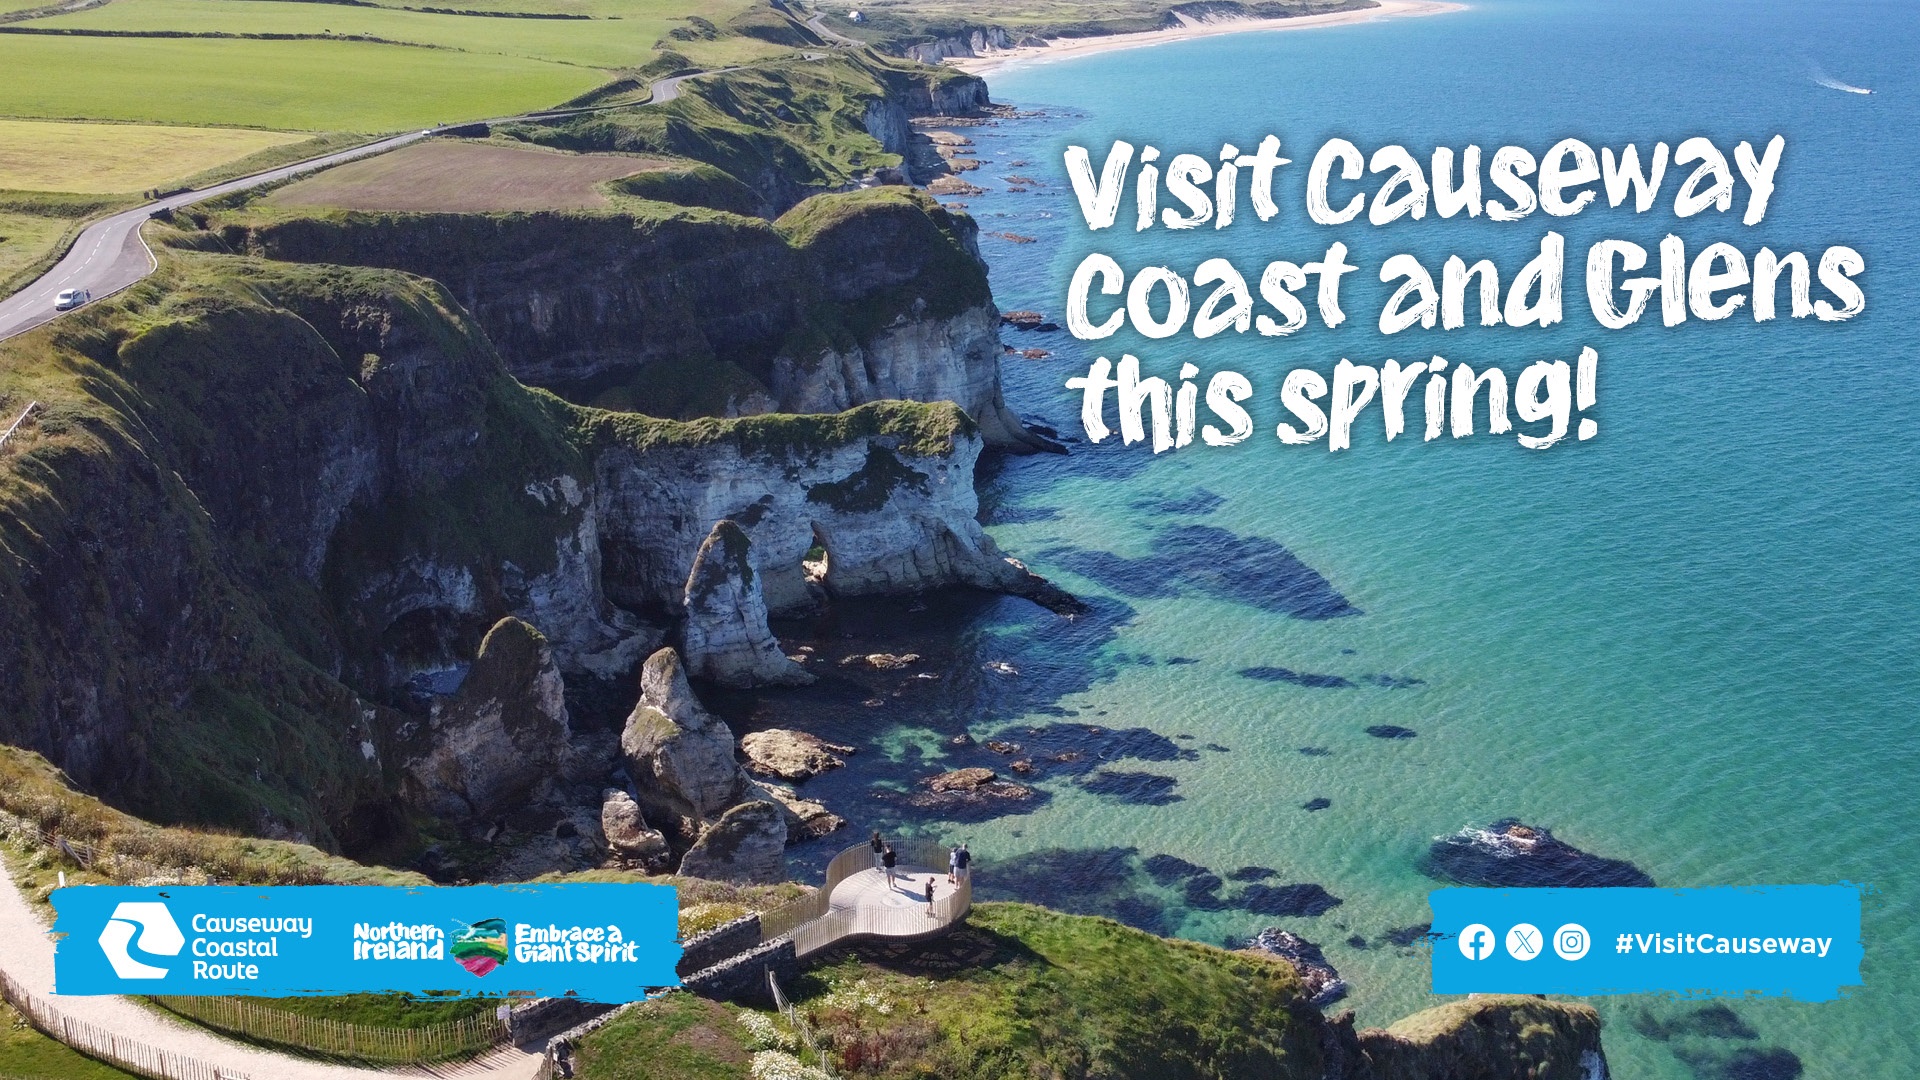 Visit the Causeway Coast and Glens this Spring